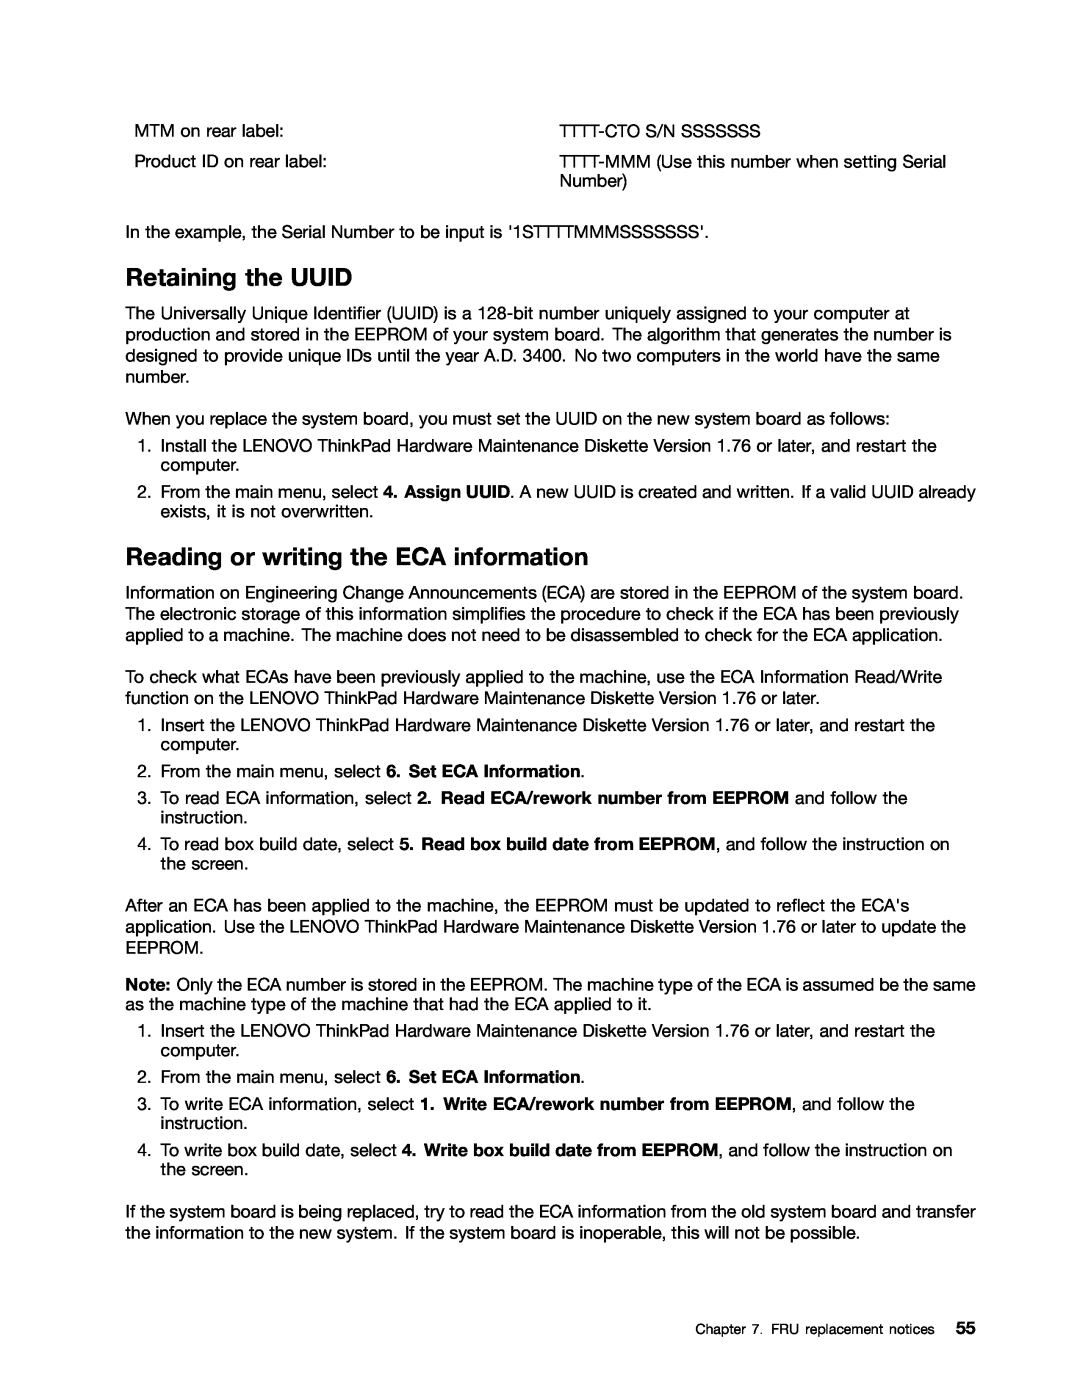 Lenovo E10 manual Retaining the UUID, Reading or writing the ECA information, FRU replacement notices 